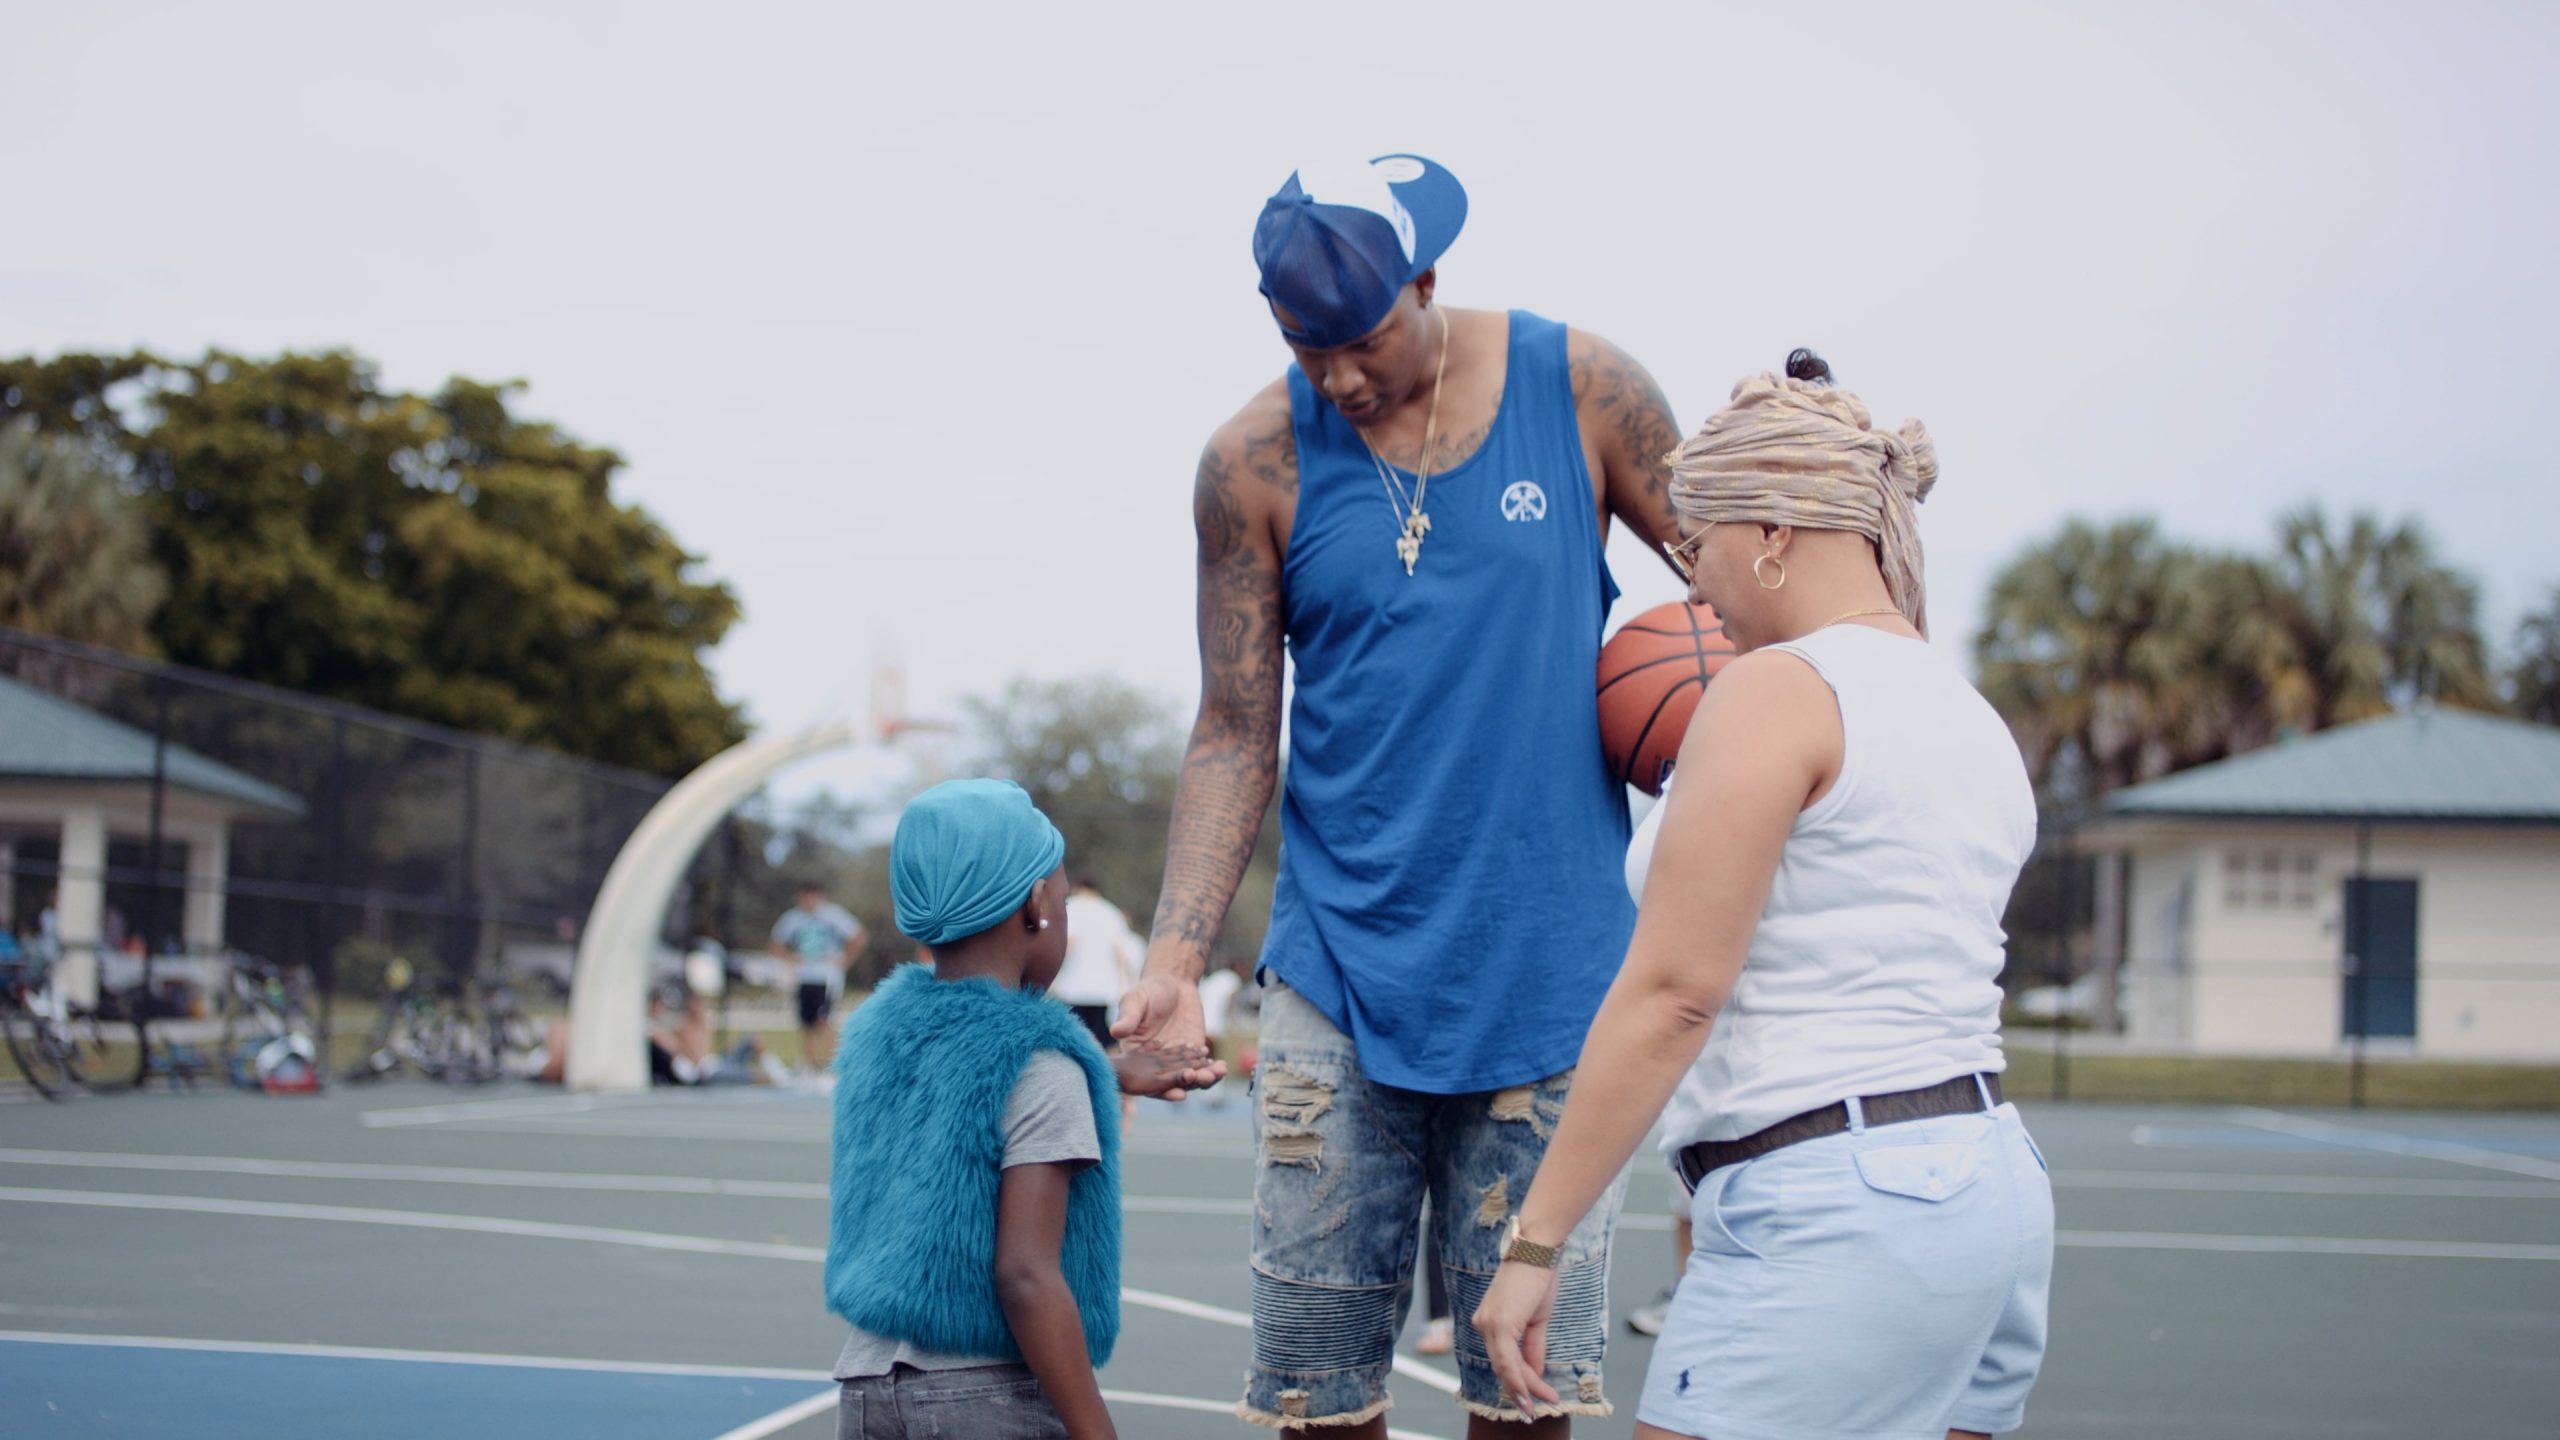 Charlie V wearing blue shirt, jean shorts and blue and white ball cap holding a basketball talking to girl wearing blue fur vest and jeans along with blue bandana while a woman looks on wearing white tank top and jean shorts